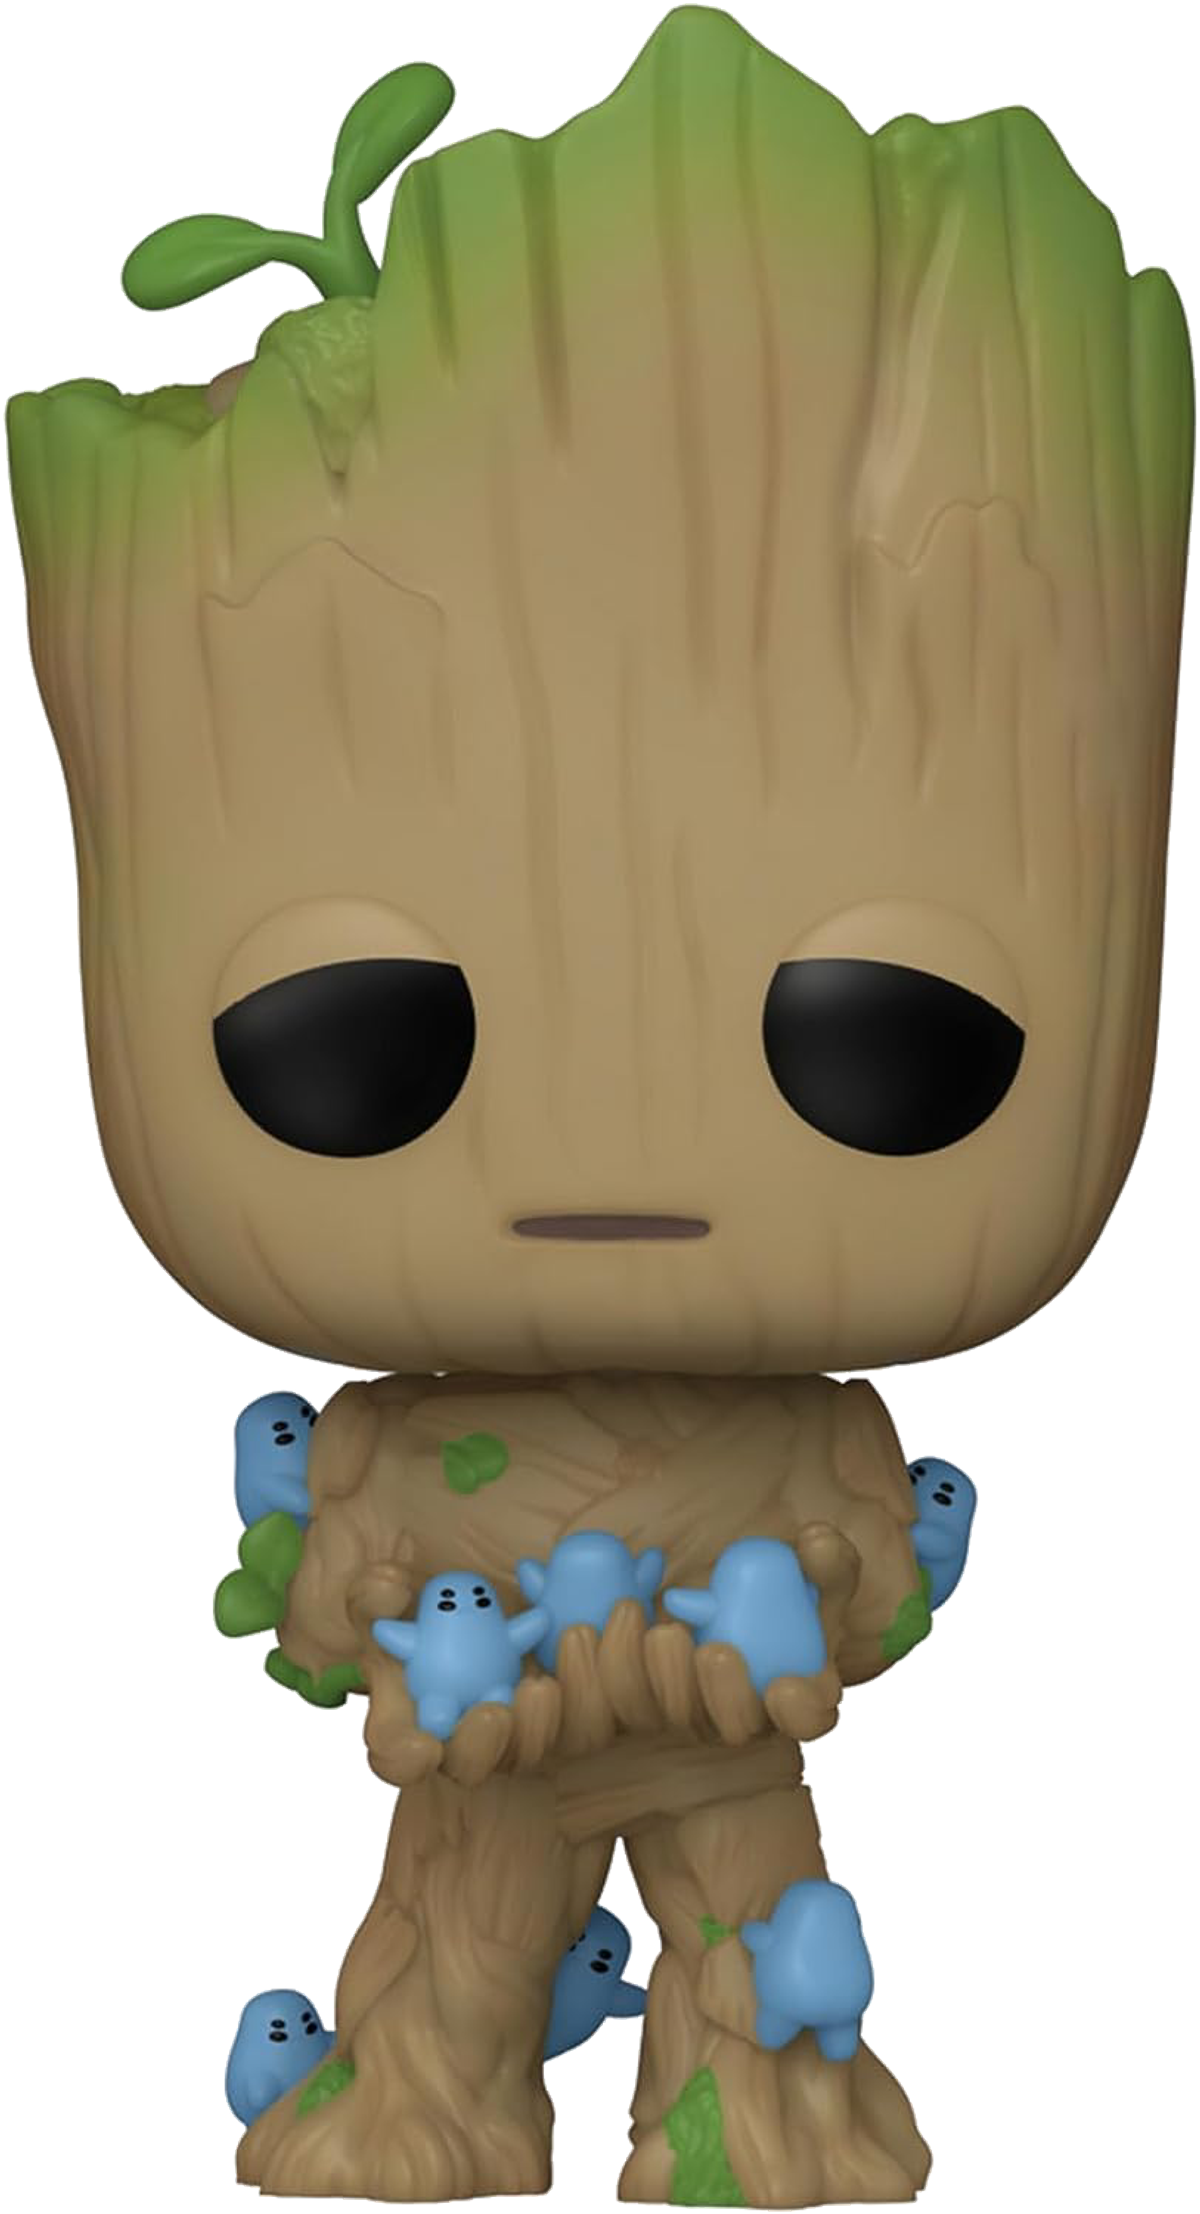 am with - - Grunds Marvel I Groot POP - Groot